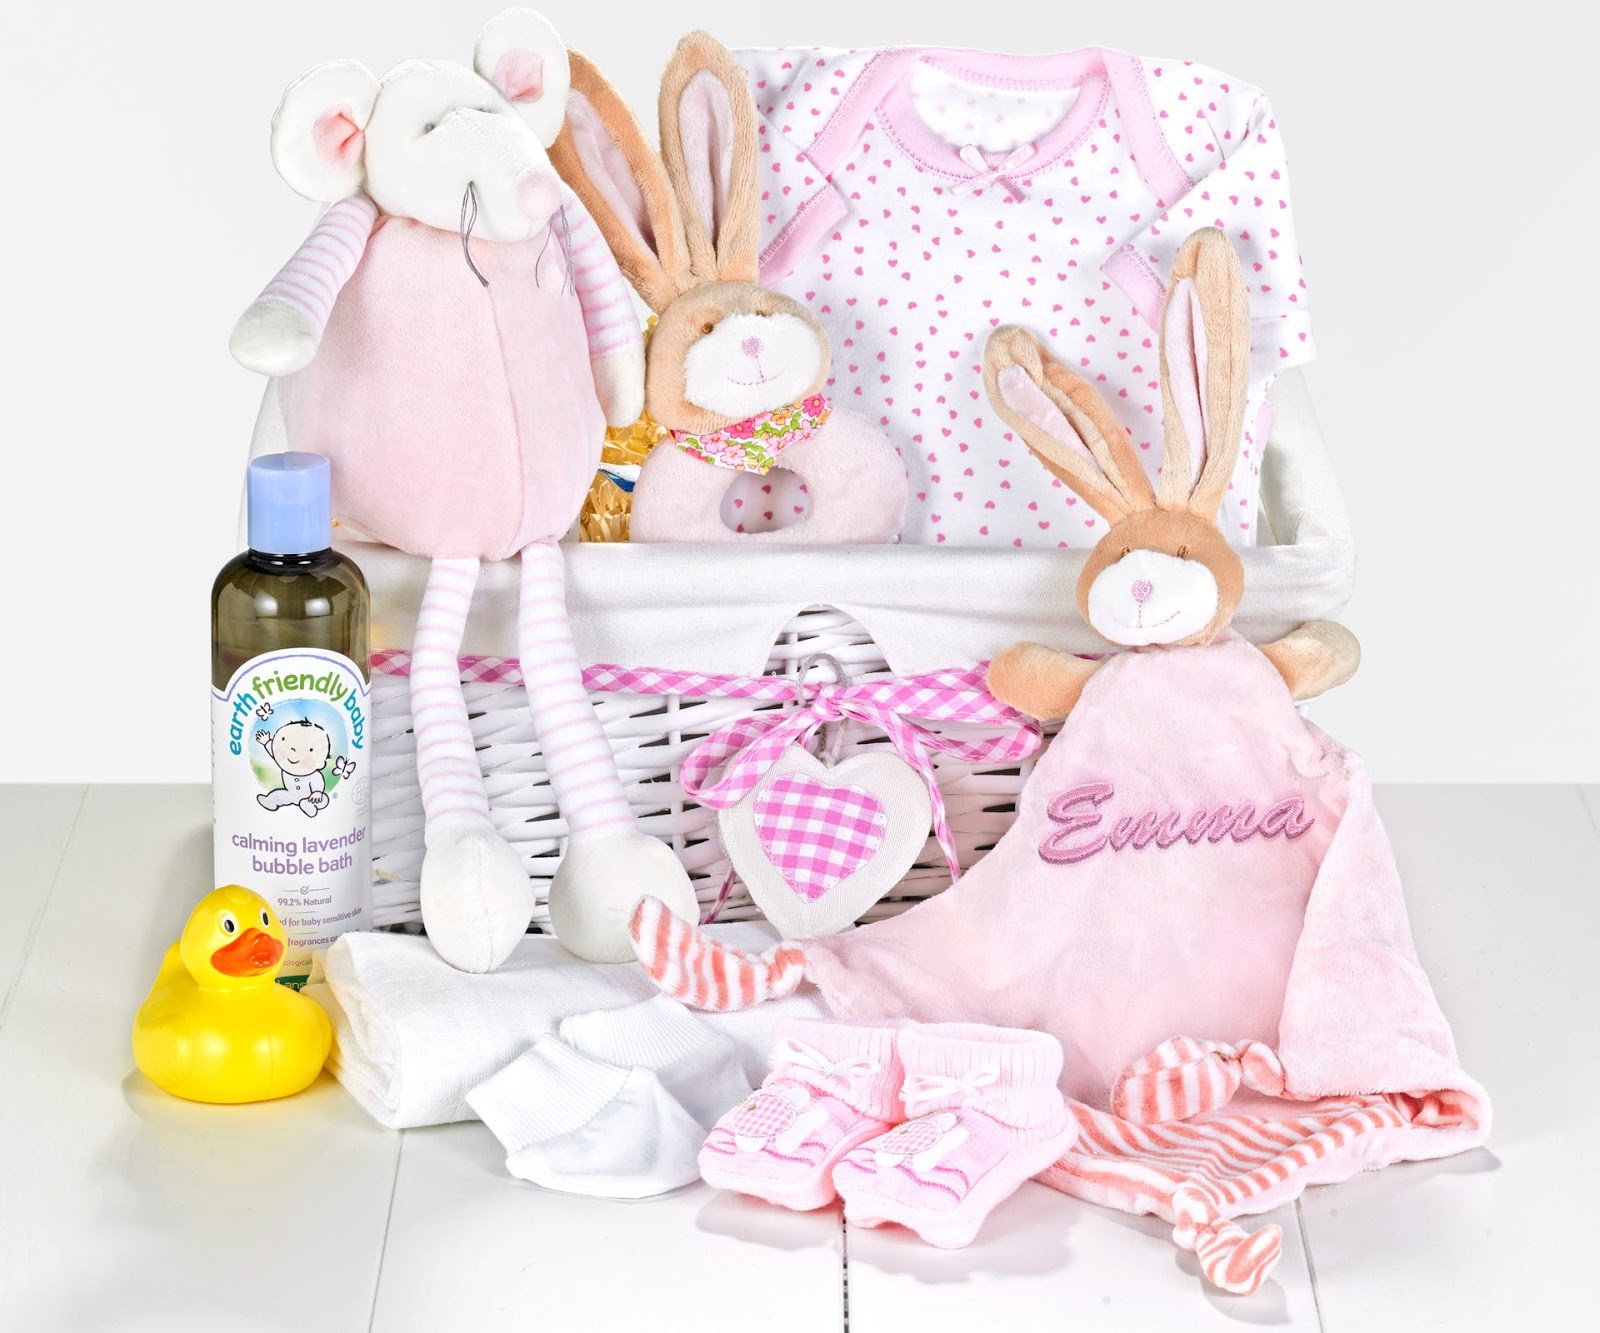 Treat the little one to a luxurious hamper